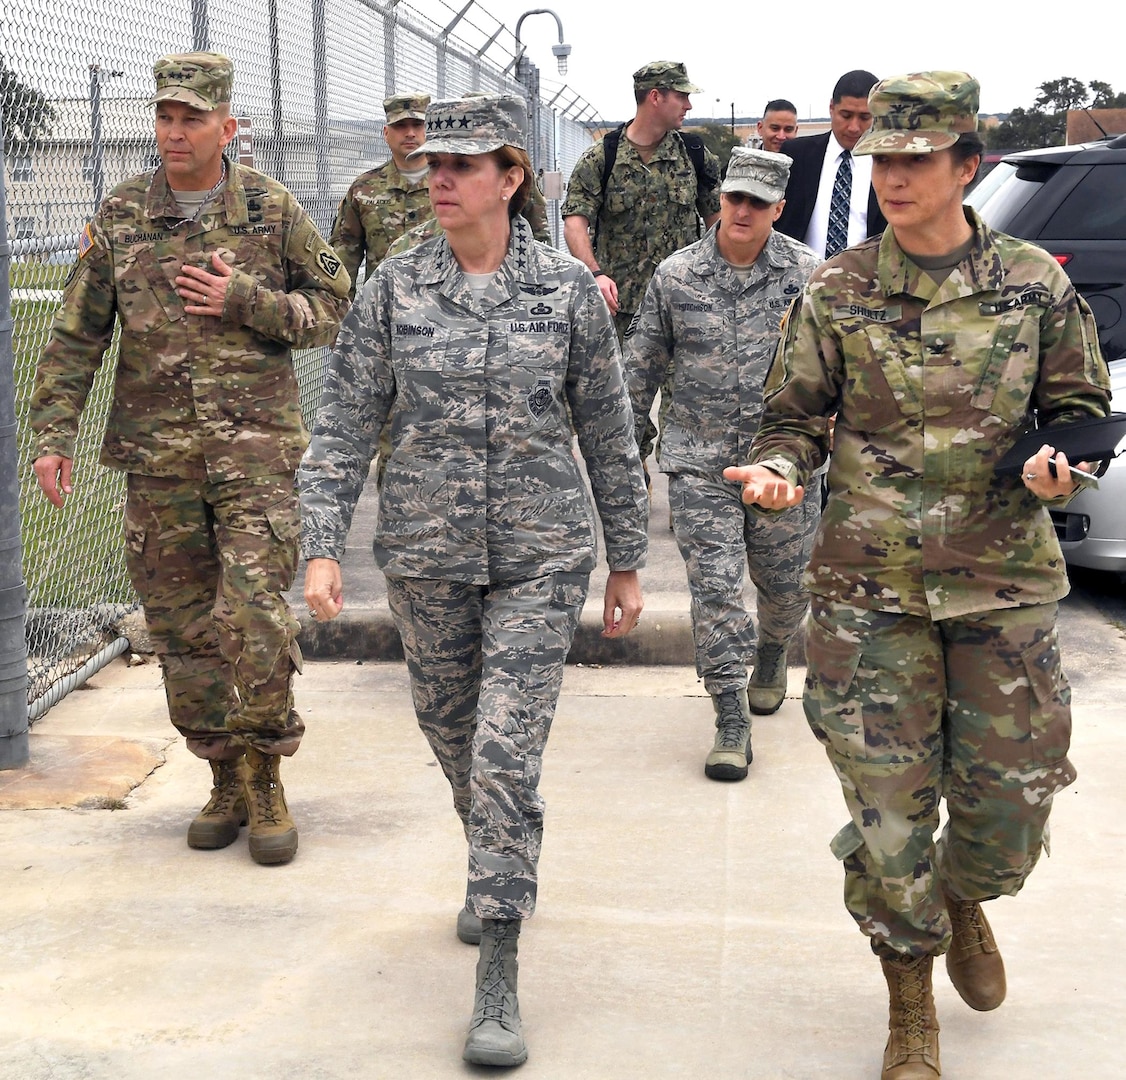 Col. Dustin Shultz (right), commander of the 505th Military Intelligence Brigade, leads Gen. Lori Robinson (center), commander of United States Northern Command and the North American Aerospace Defense Command, on a tour of the brigade as part of Robinson's Feb. 2 visit to Joint Base San Antonio-Camp Bullis, Texas. Army North Commander Lt. Gen. Jeffrey Buchanan is on the left.